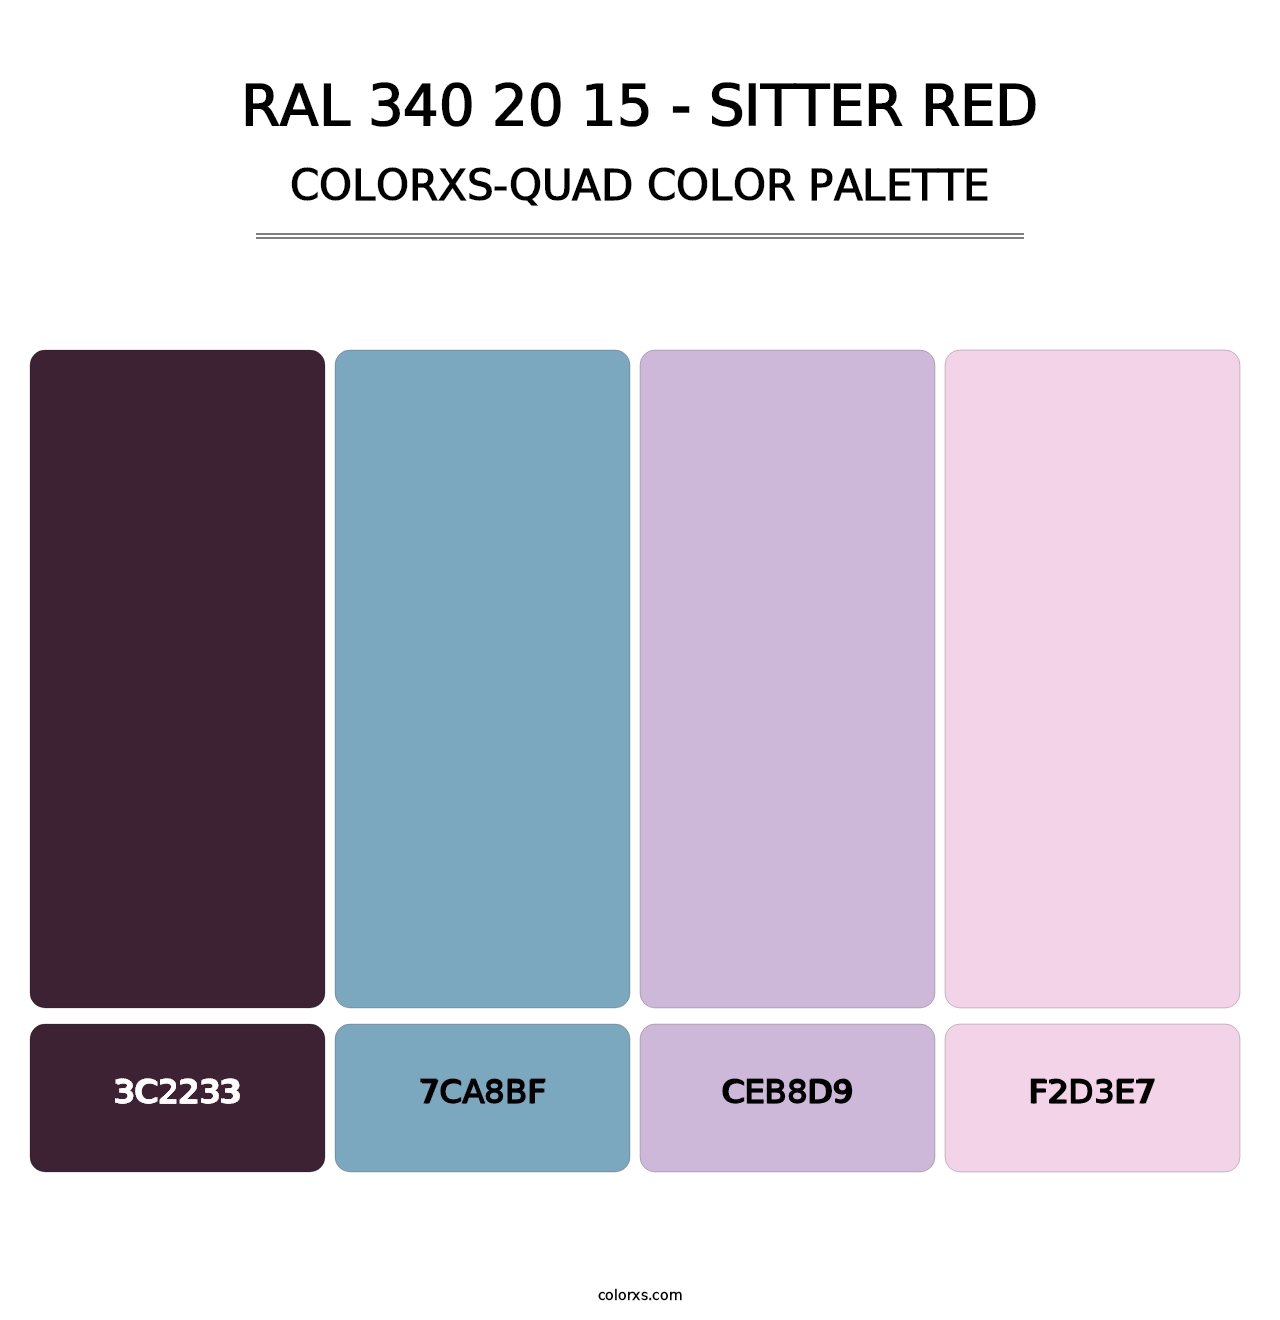 RAL 340 20 15 - Sitter Red - Colorxs Quad Palette